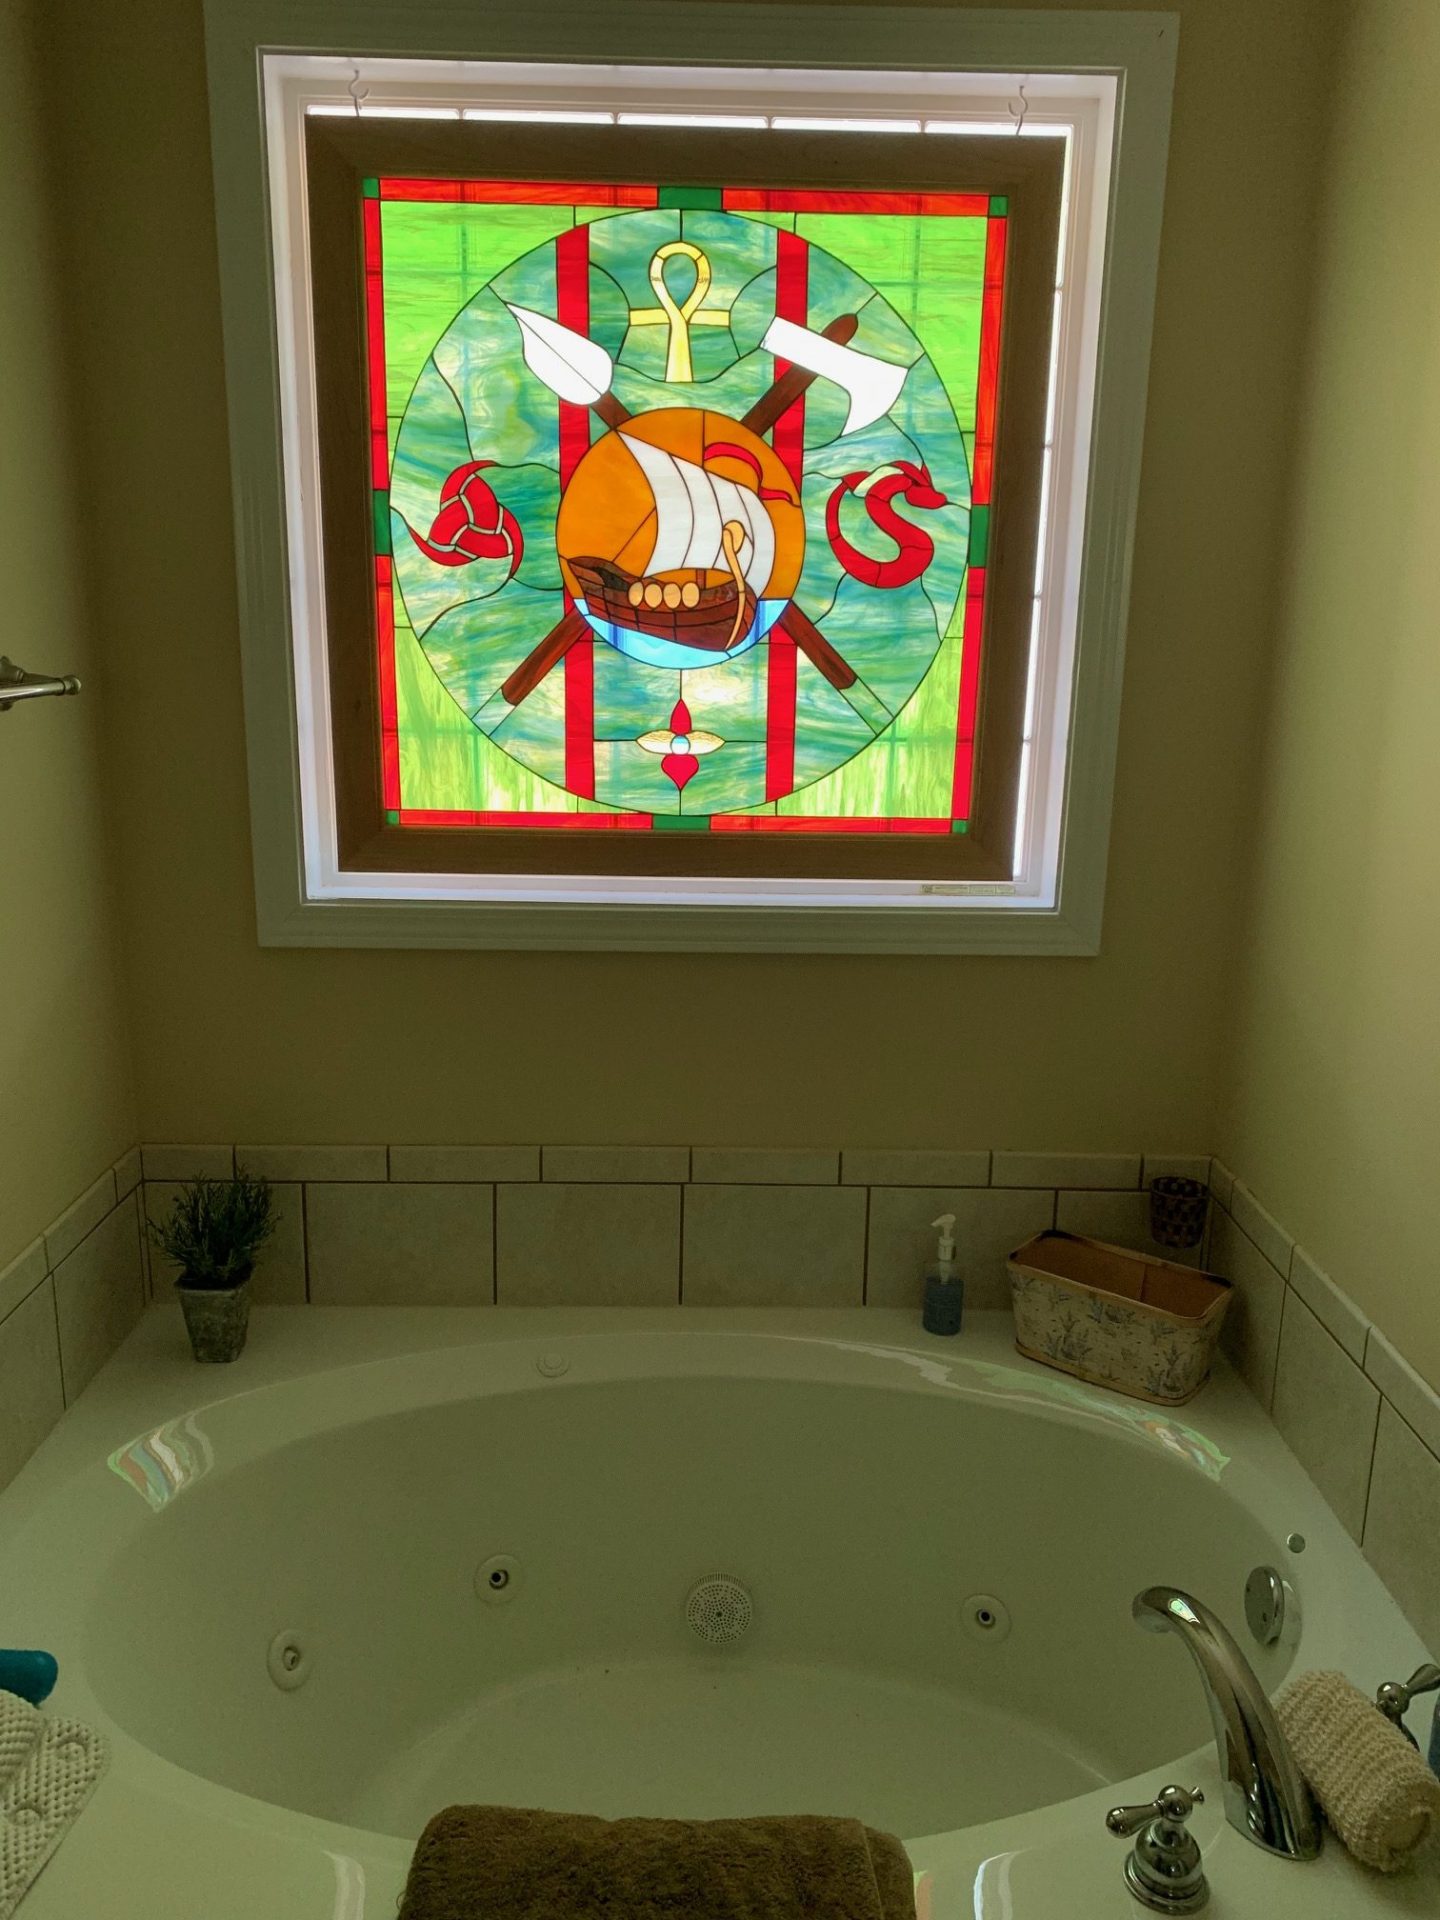 Unique! Viking Theme stained Glass Bathroom Window For Privacy & Beauty